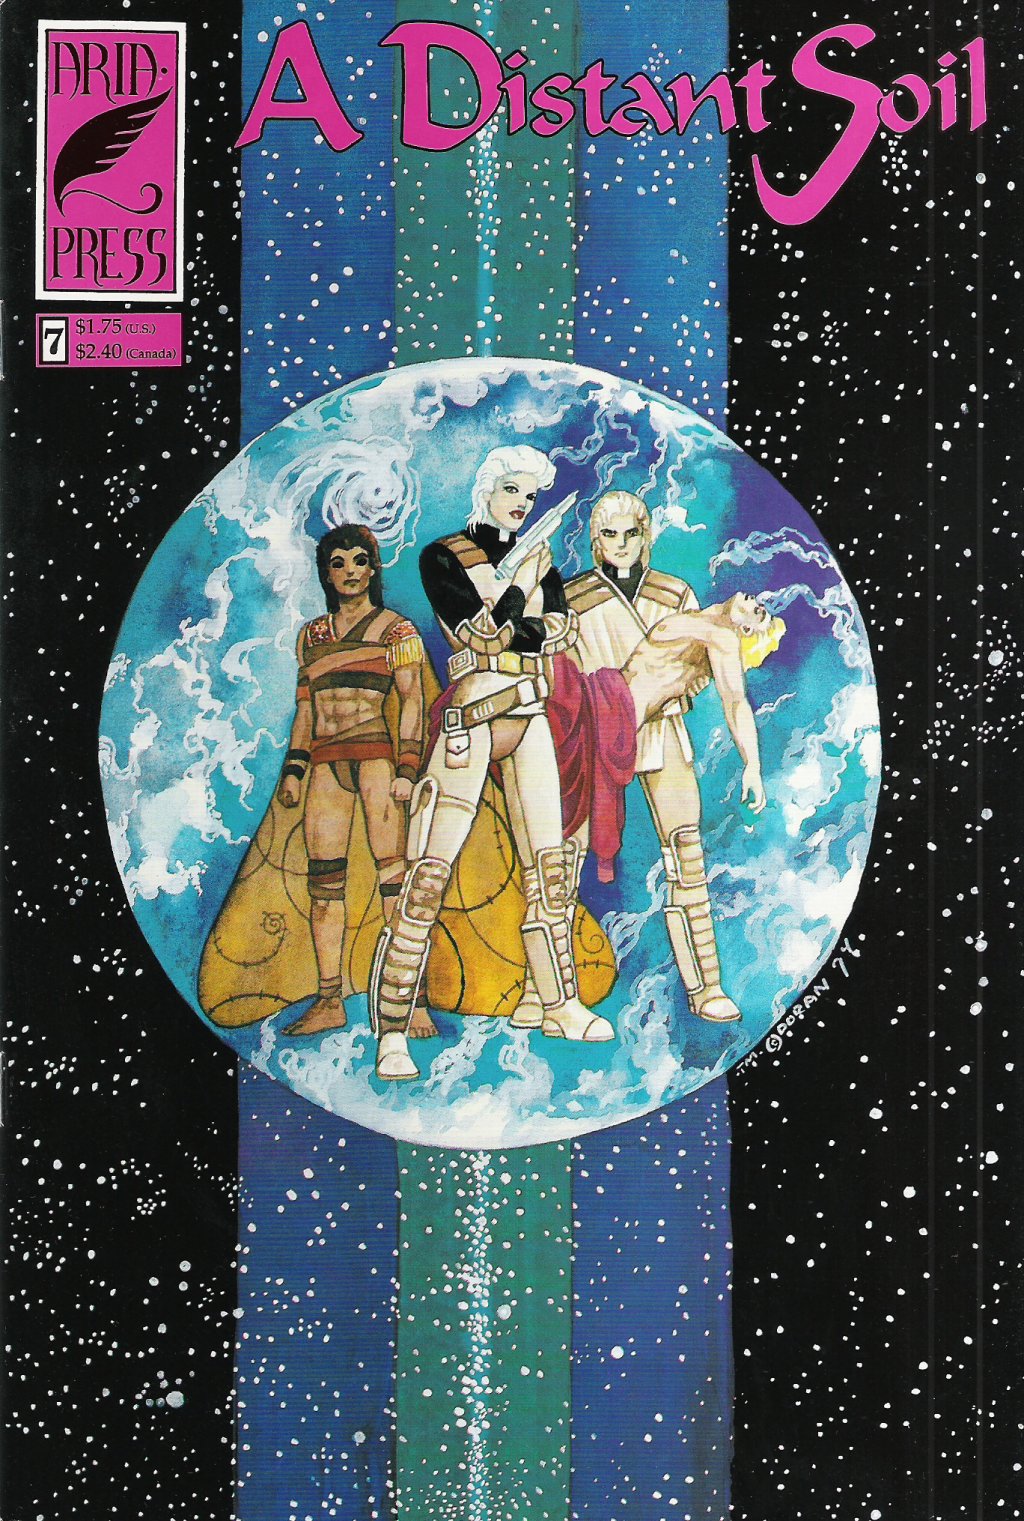 Read online A Distant Soil comic -  Issue #7 - 1